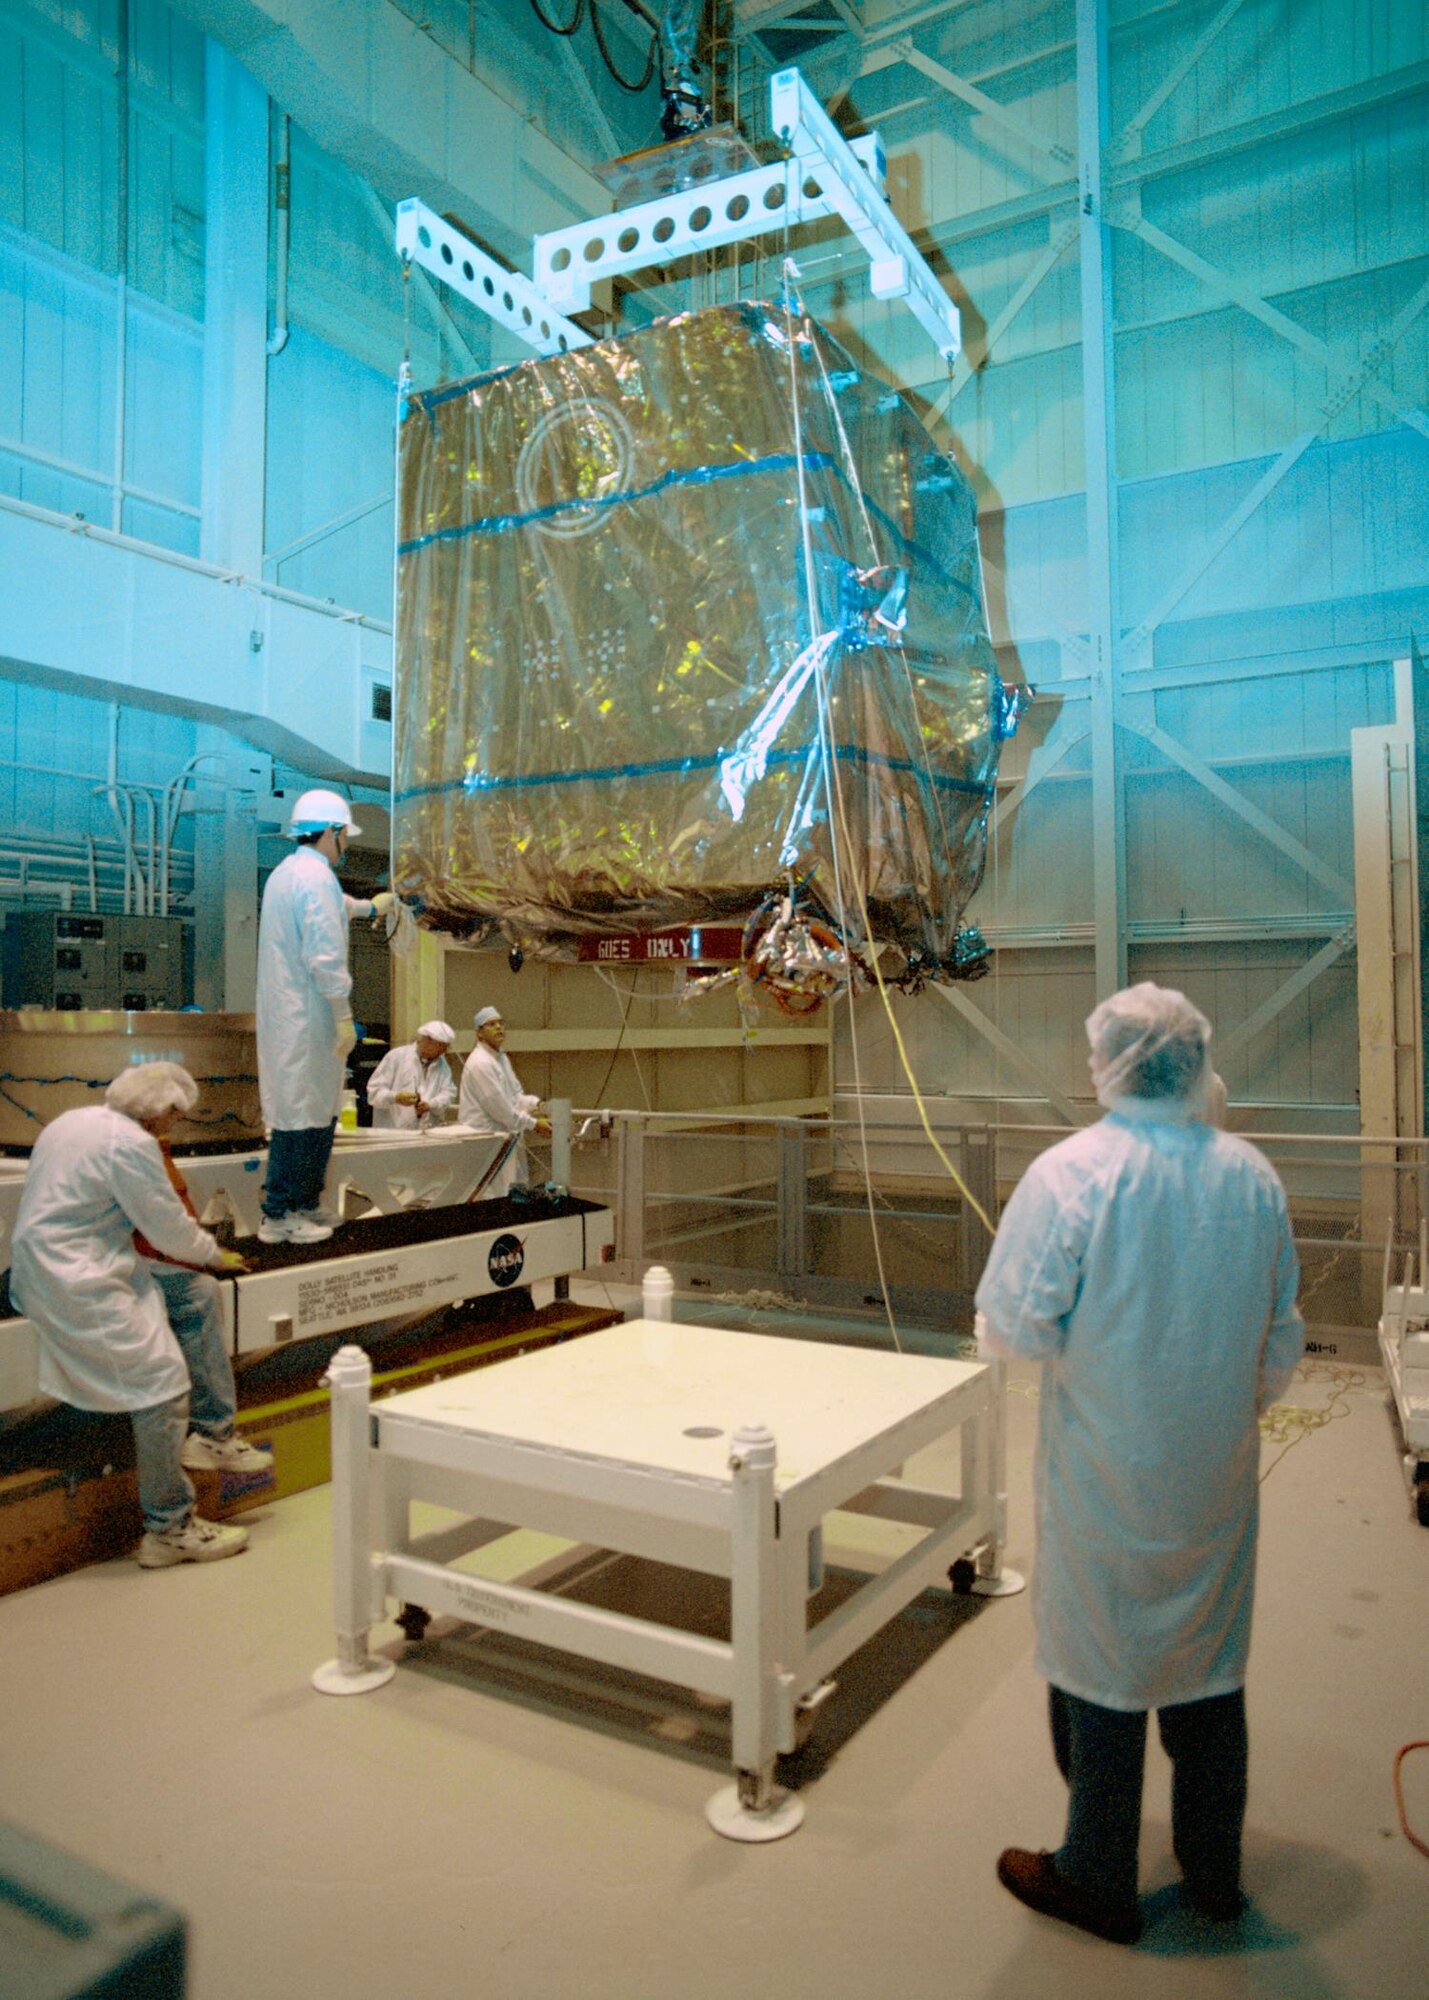 An AEDC test team prepare to hoist the Geostationary Operational Environmental Satellite-M (GOES-M) weather satellite into the clean room at the Complex Mark 1 Space Chamber in 2000. The testing at AEDC helped confirm satellite operation under simulated space conditions before it was placed in orbit. (AEDC file photo)